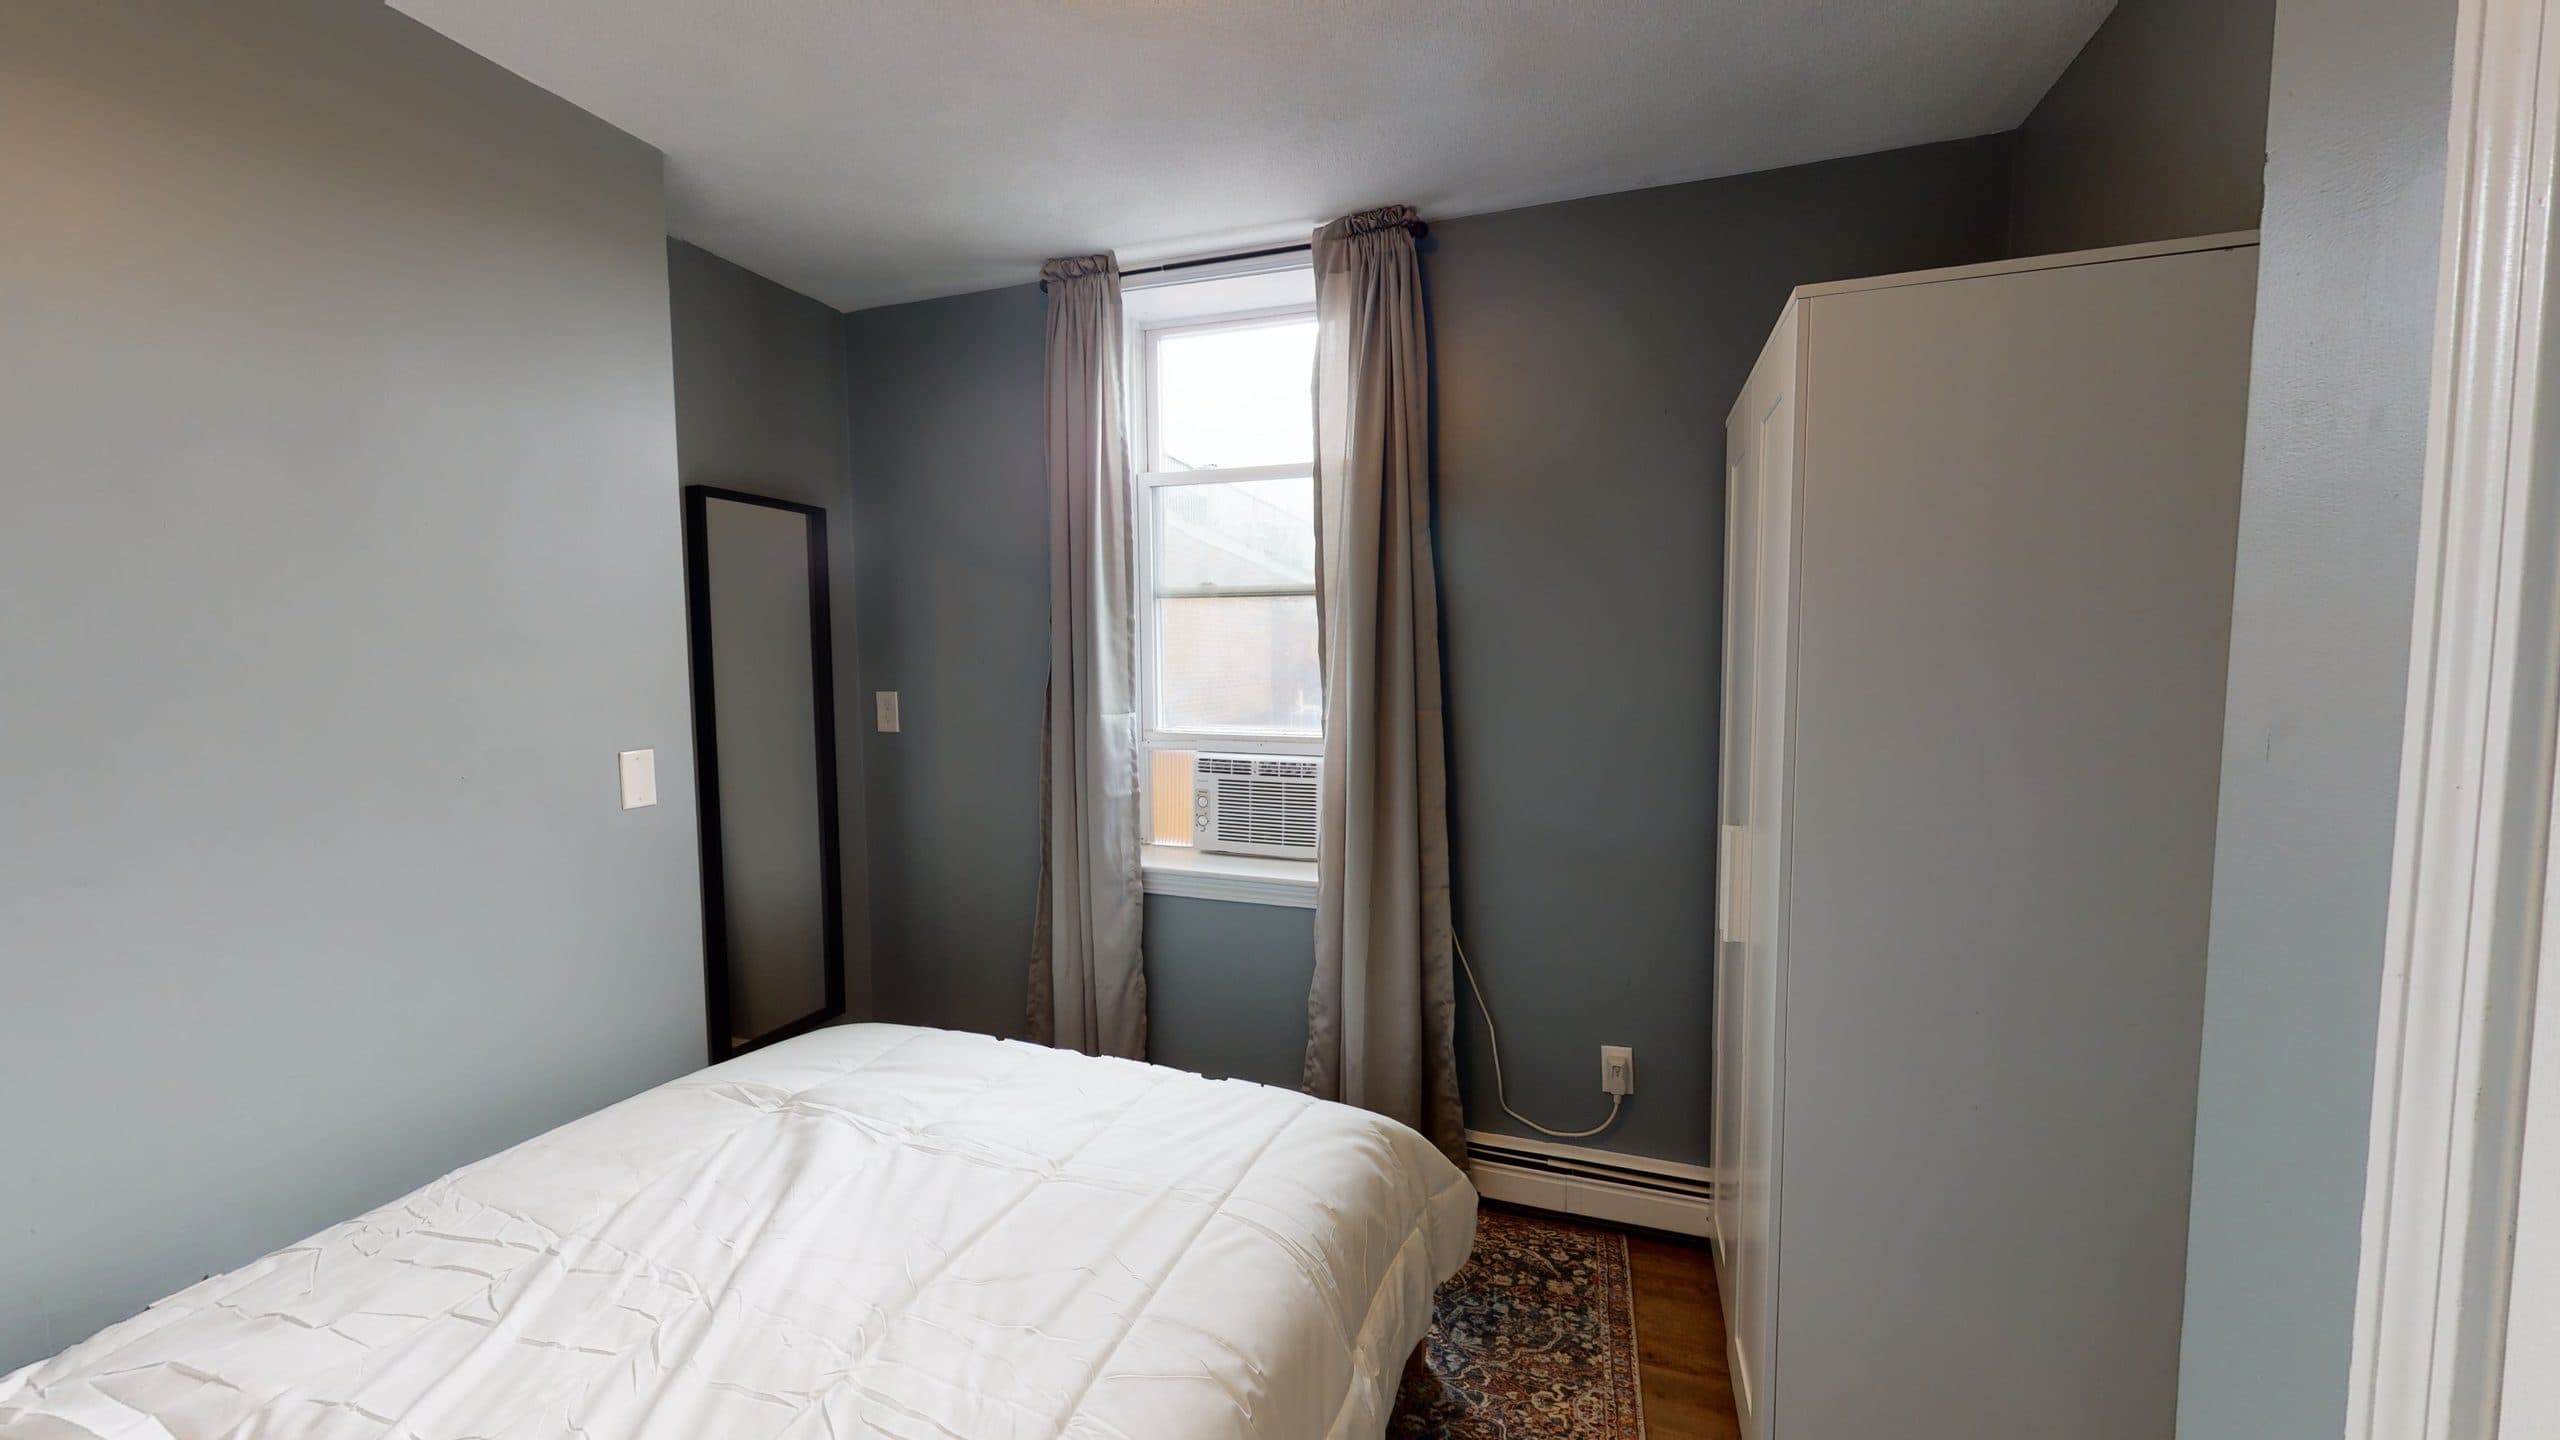 Photo 12 of #1281: Queen Bedroom A at June Homes